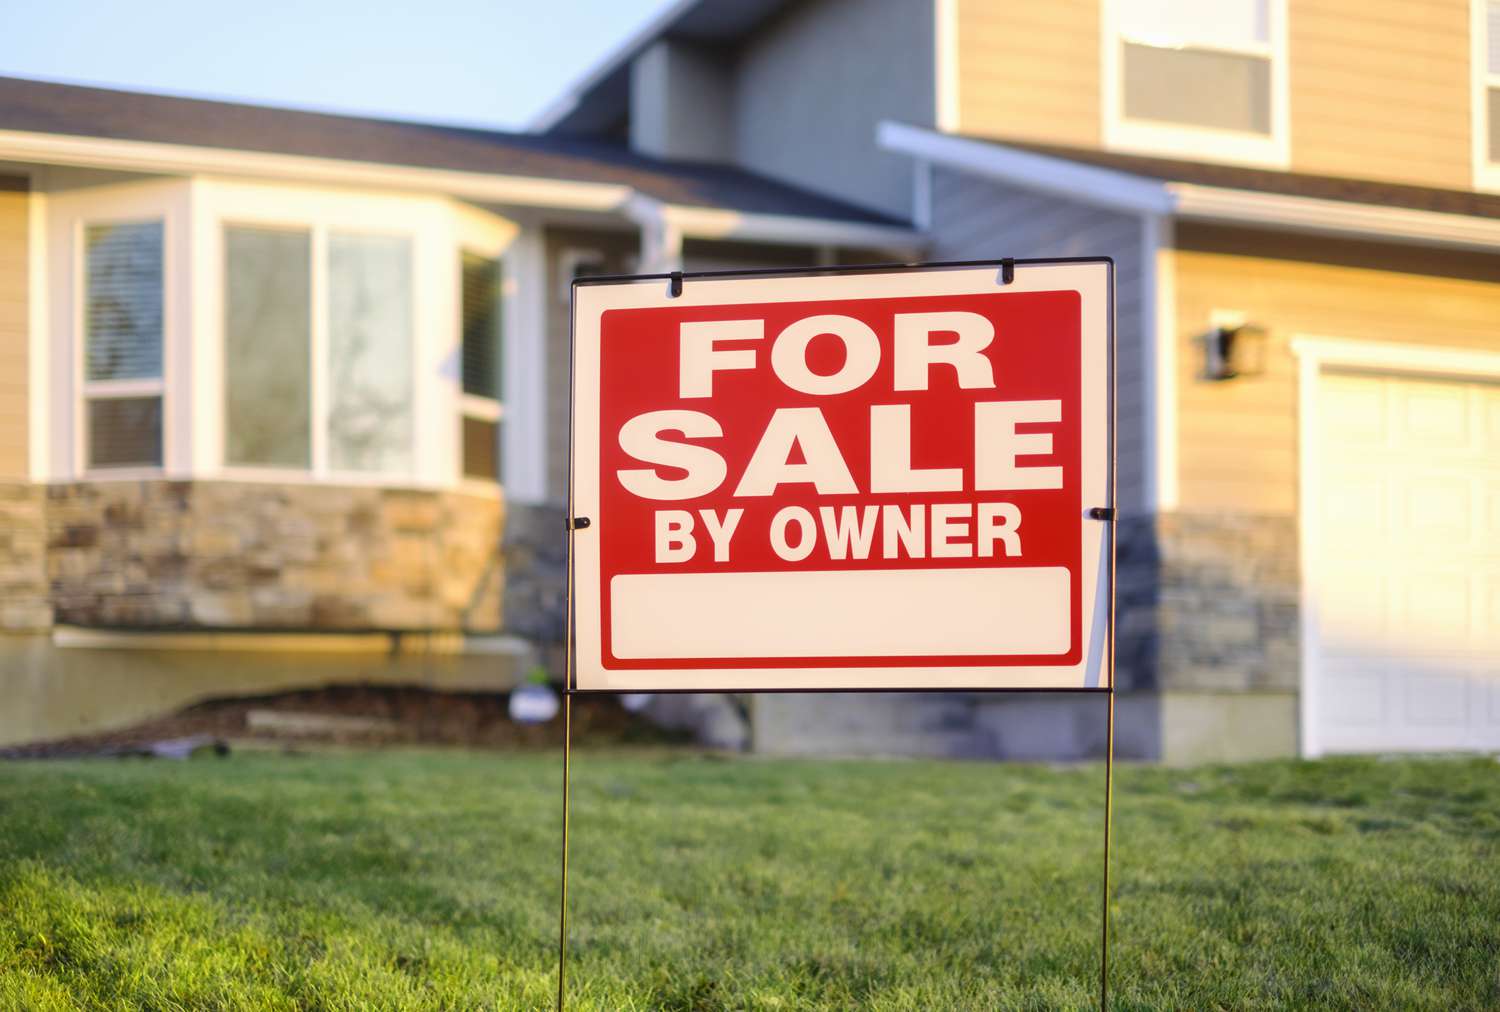 A 'For Sale by Owner' sign in front of a picturesque home, signifying the initial step many take to sell their homes without a realtor.